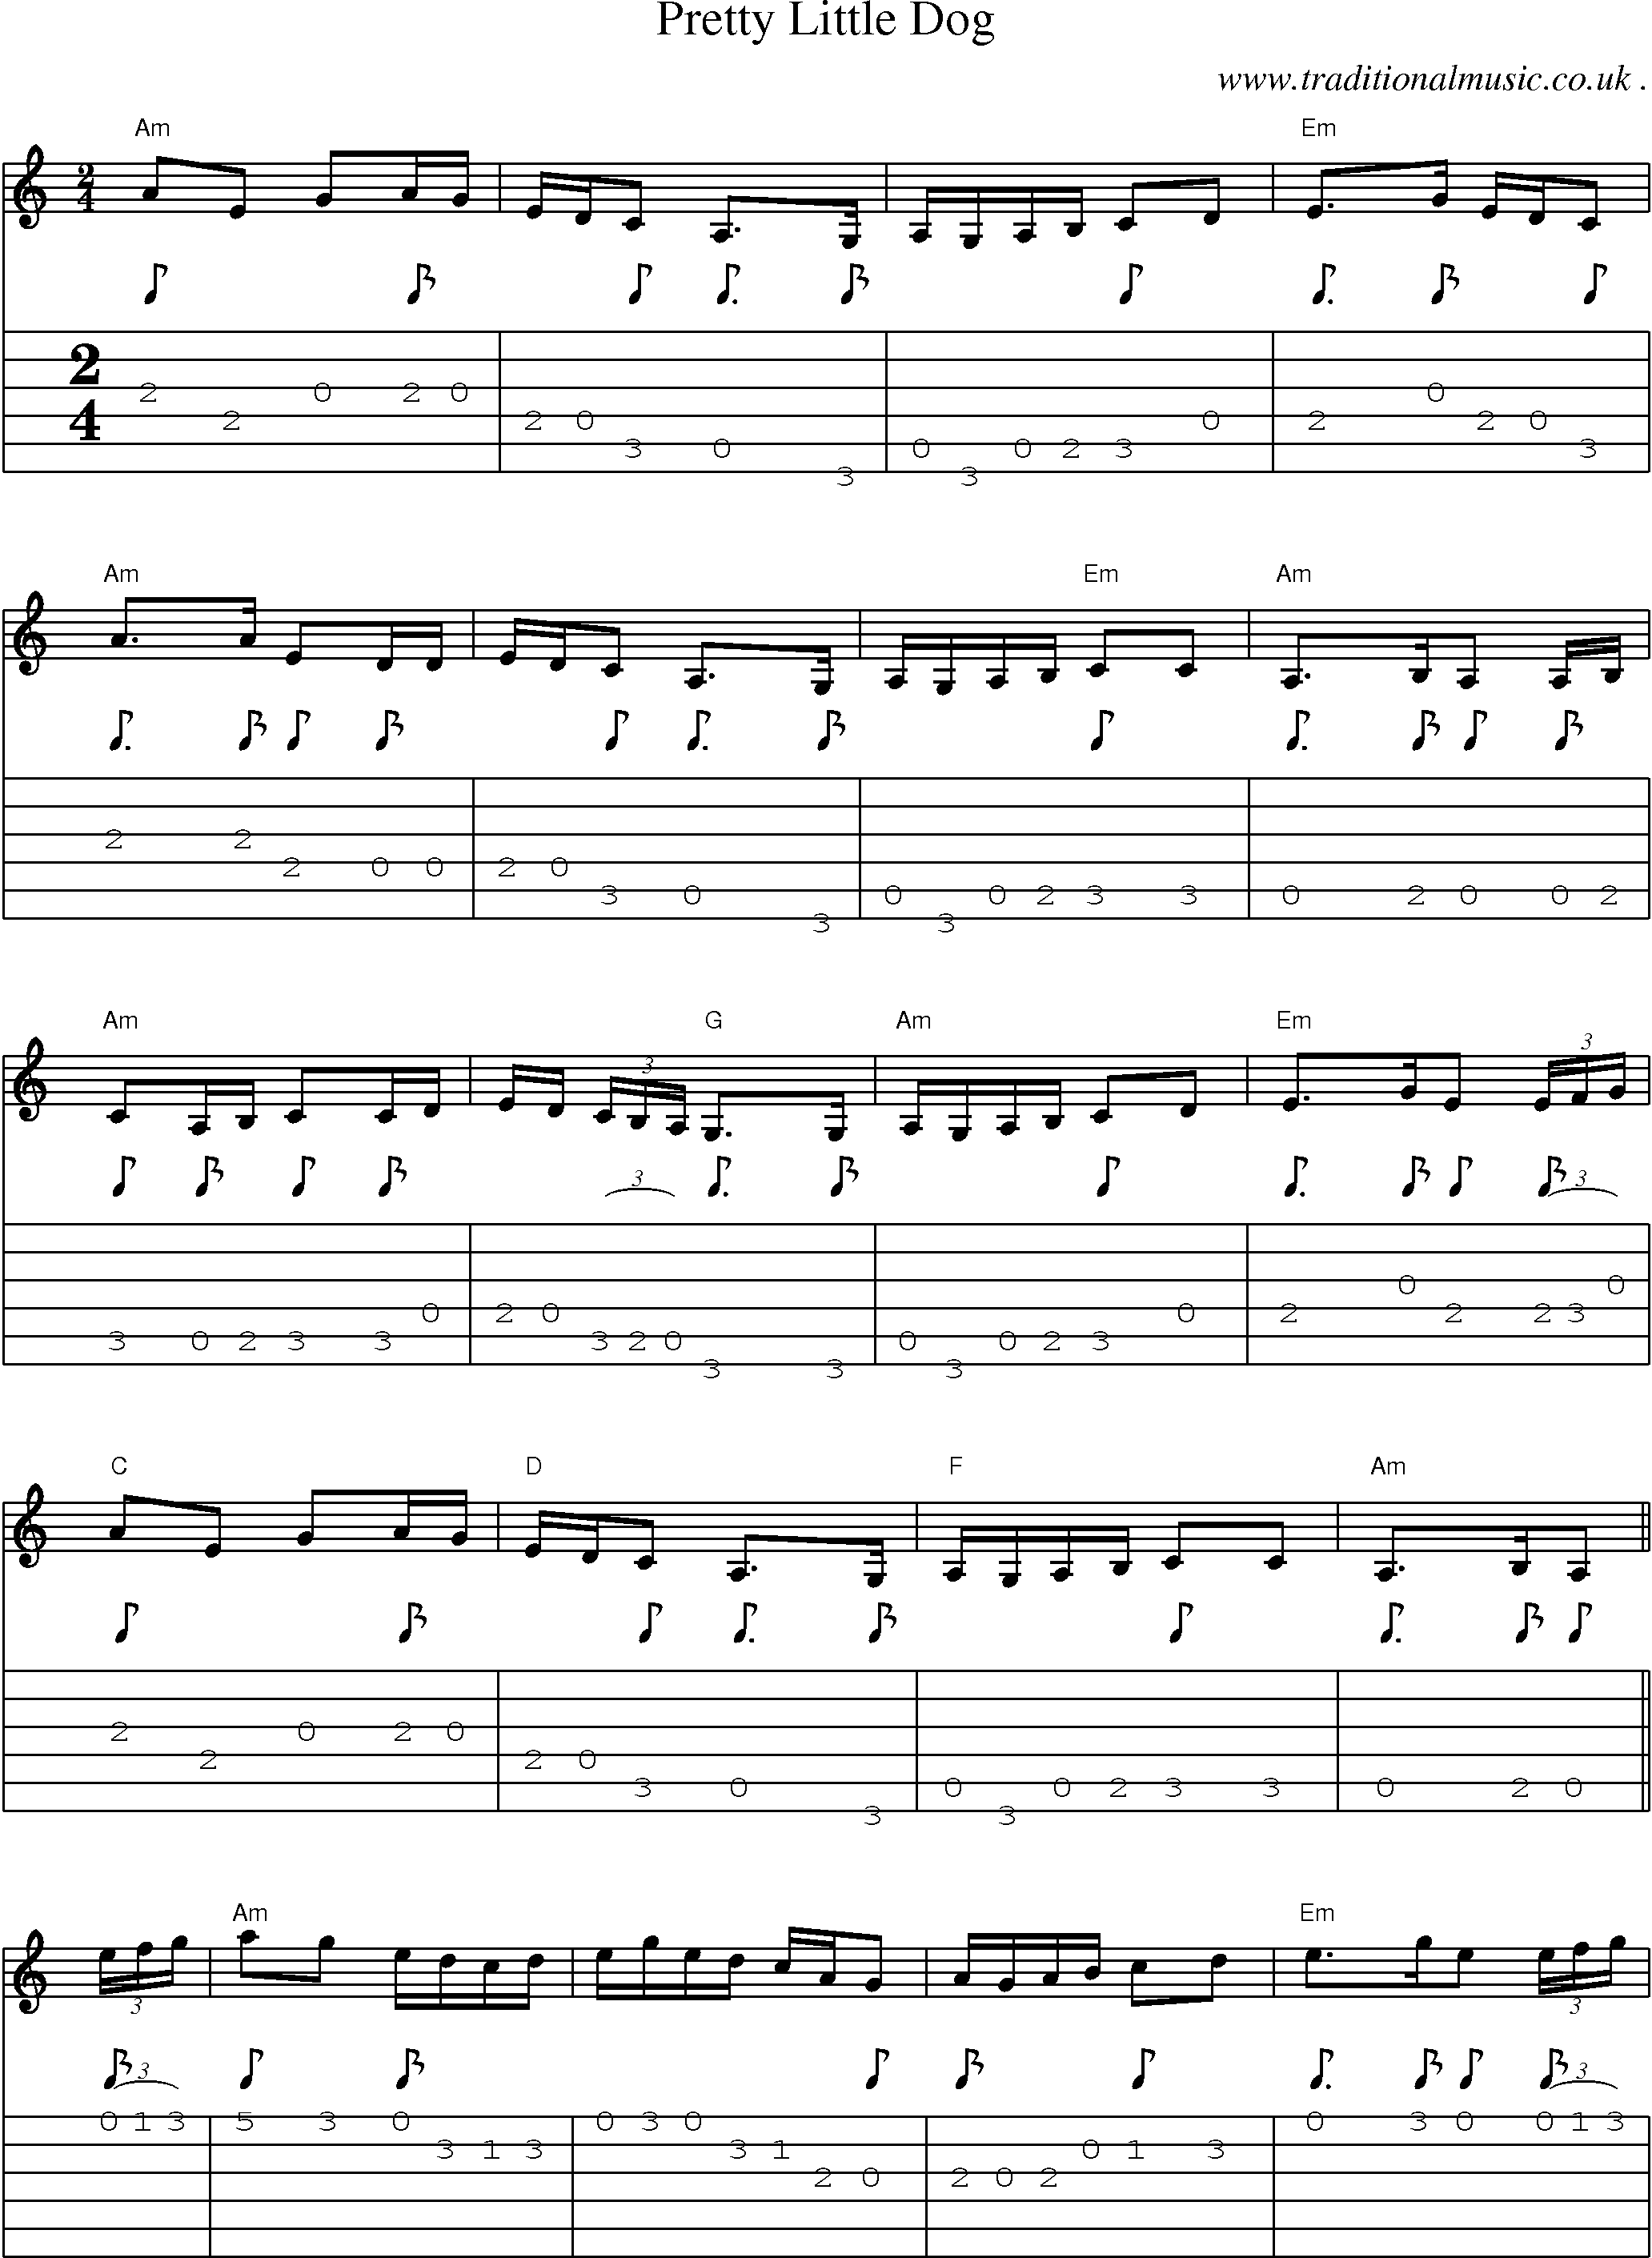 Music Score and Guitar Tabs for Pretty Little Dog